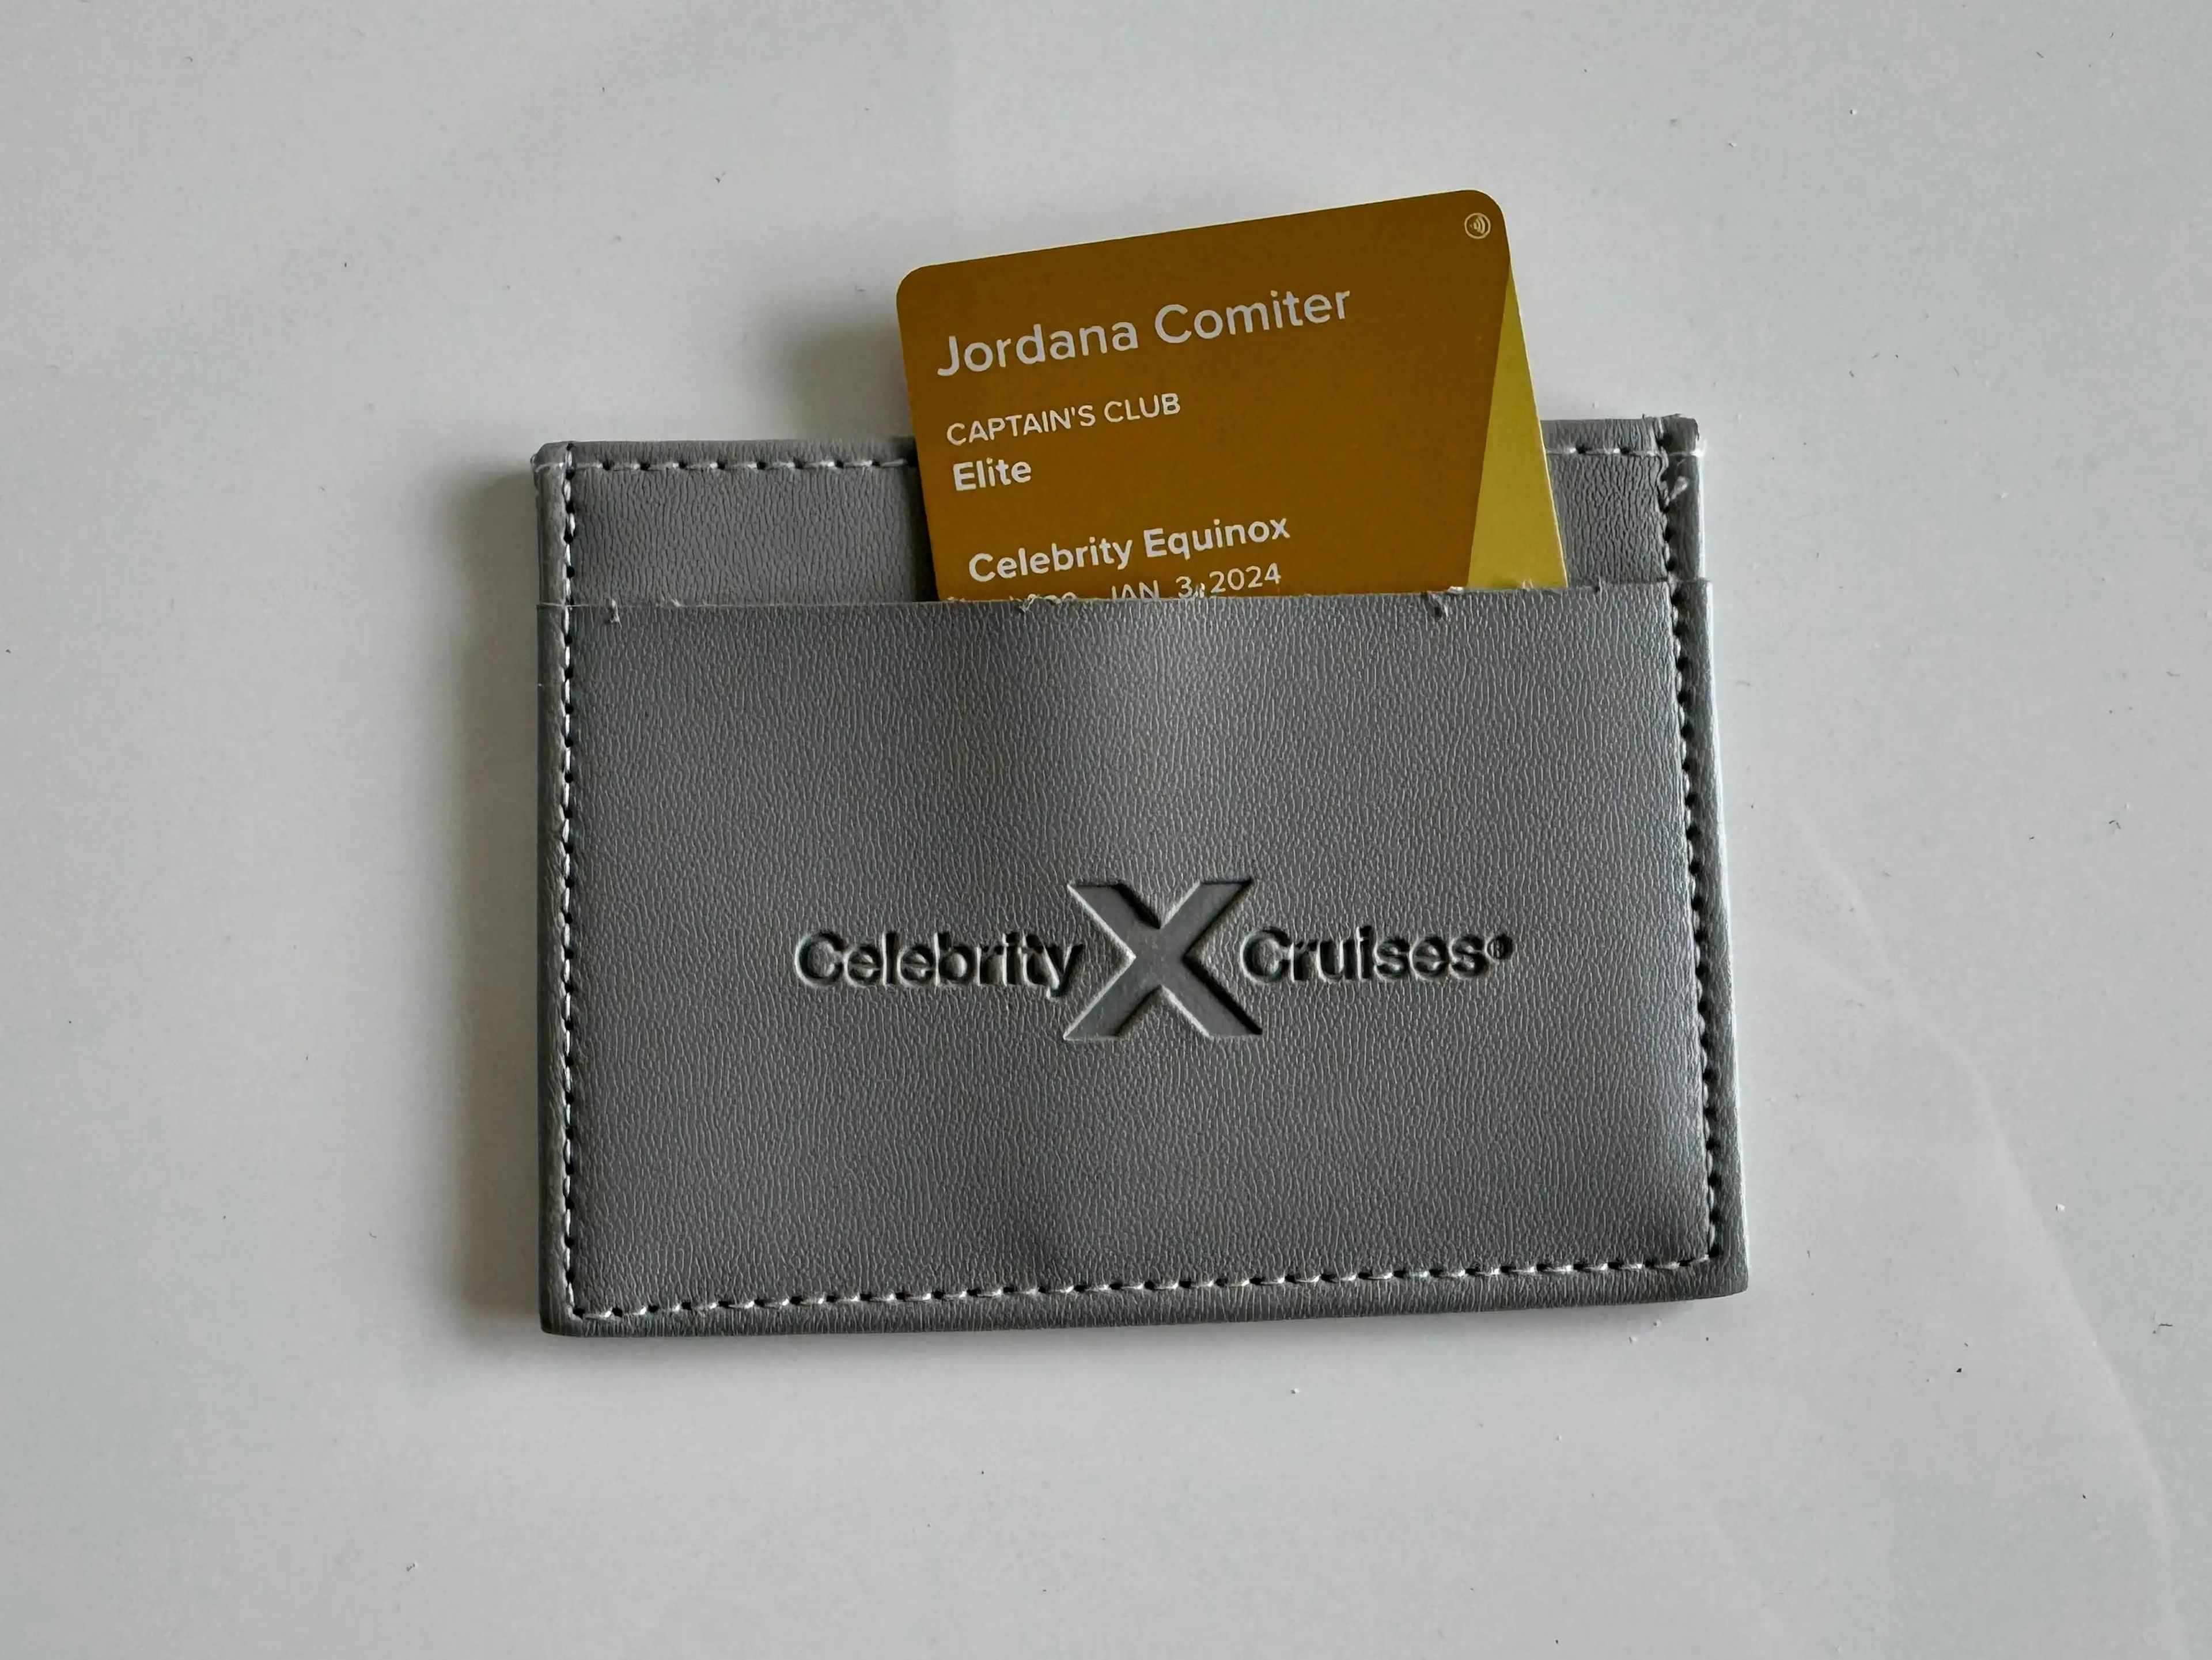 jordana's cruise card sticking out of a small wallet